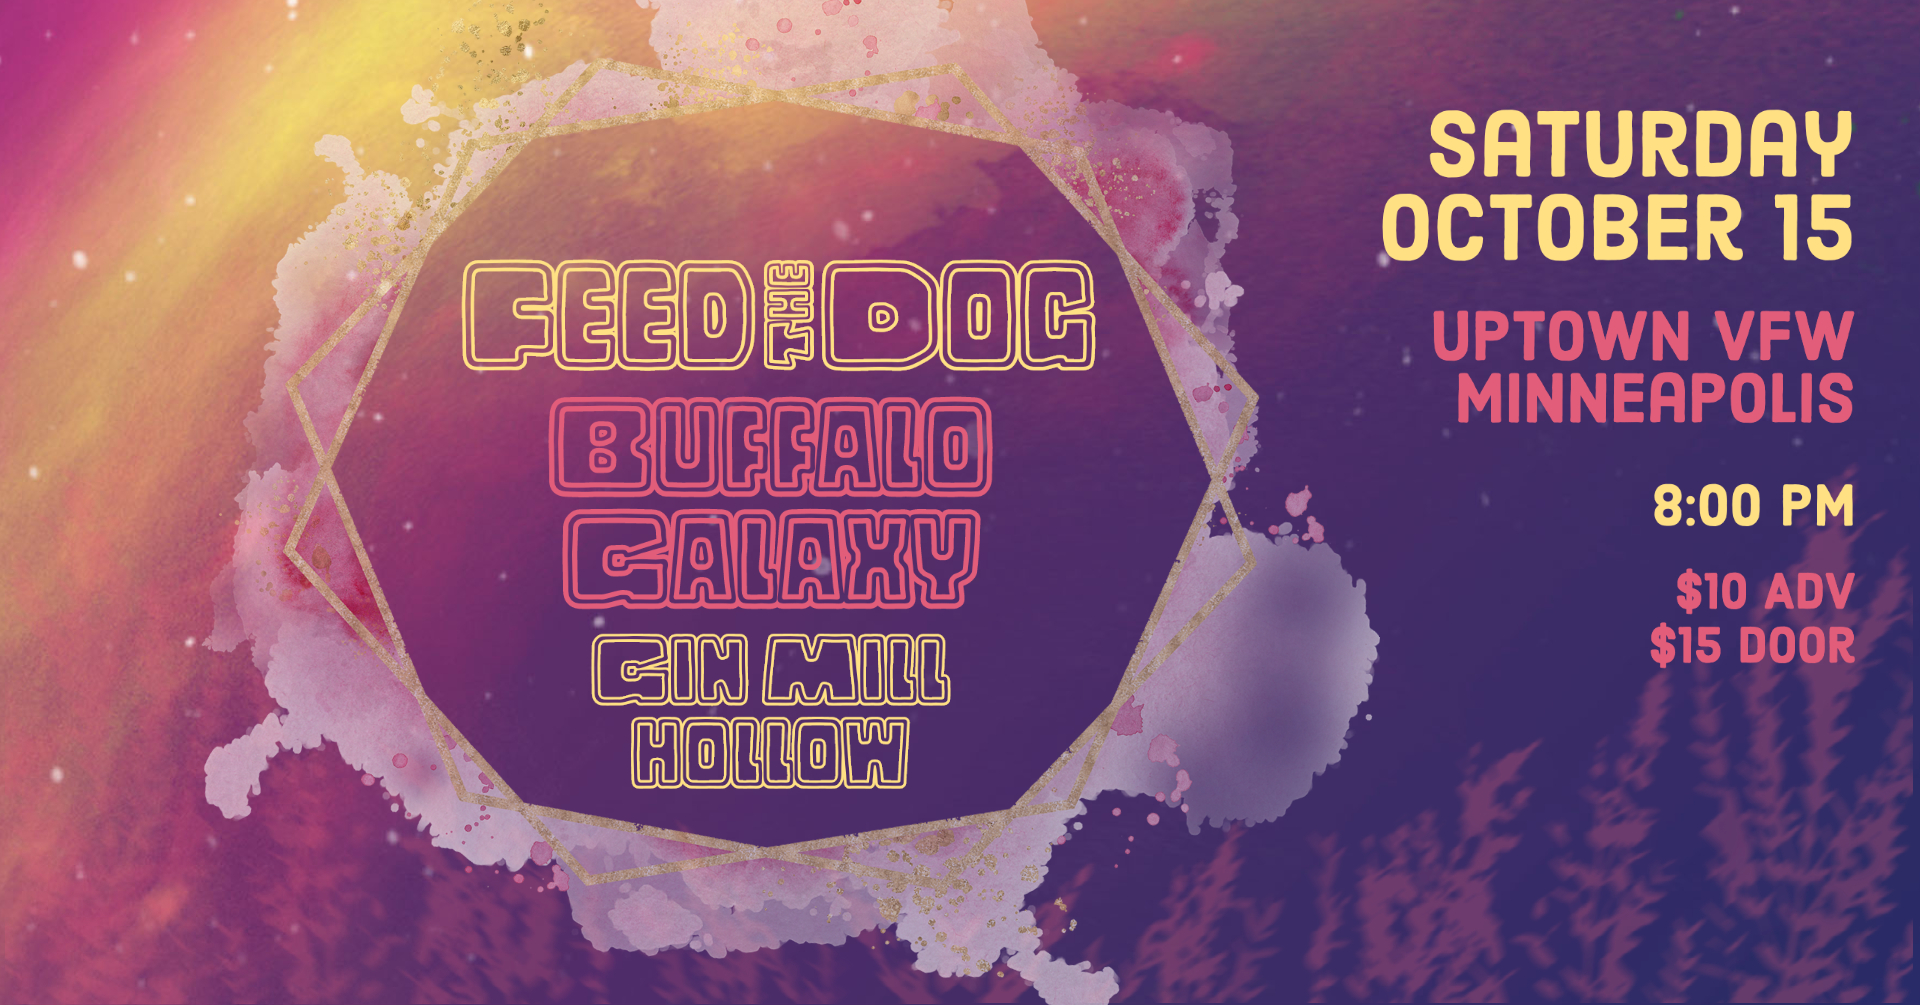 Feed The Dog Buffalo Galaxy (Album Release) Gin Mill Hollow (Madison) Saturday, October 15 James Ballentine "Uptown" VFW Post 246 Doors 8:00pm :: Music 8:30pm :: 21+ GA $10 ADV / $15 DOS